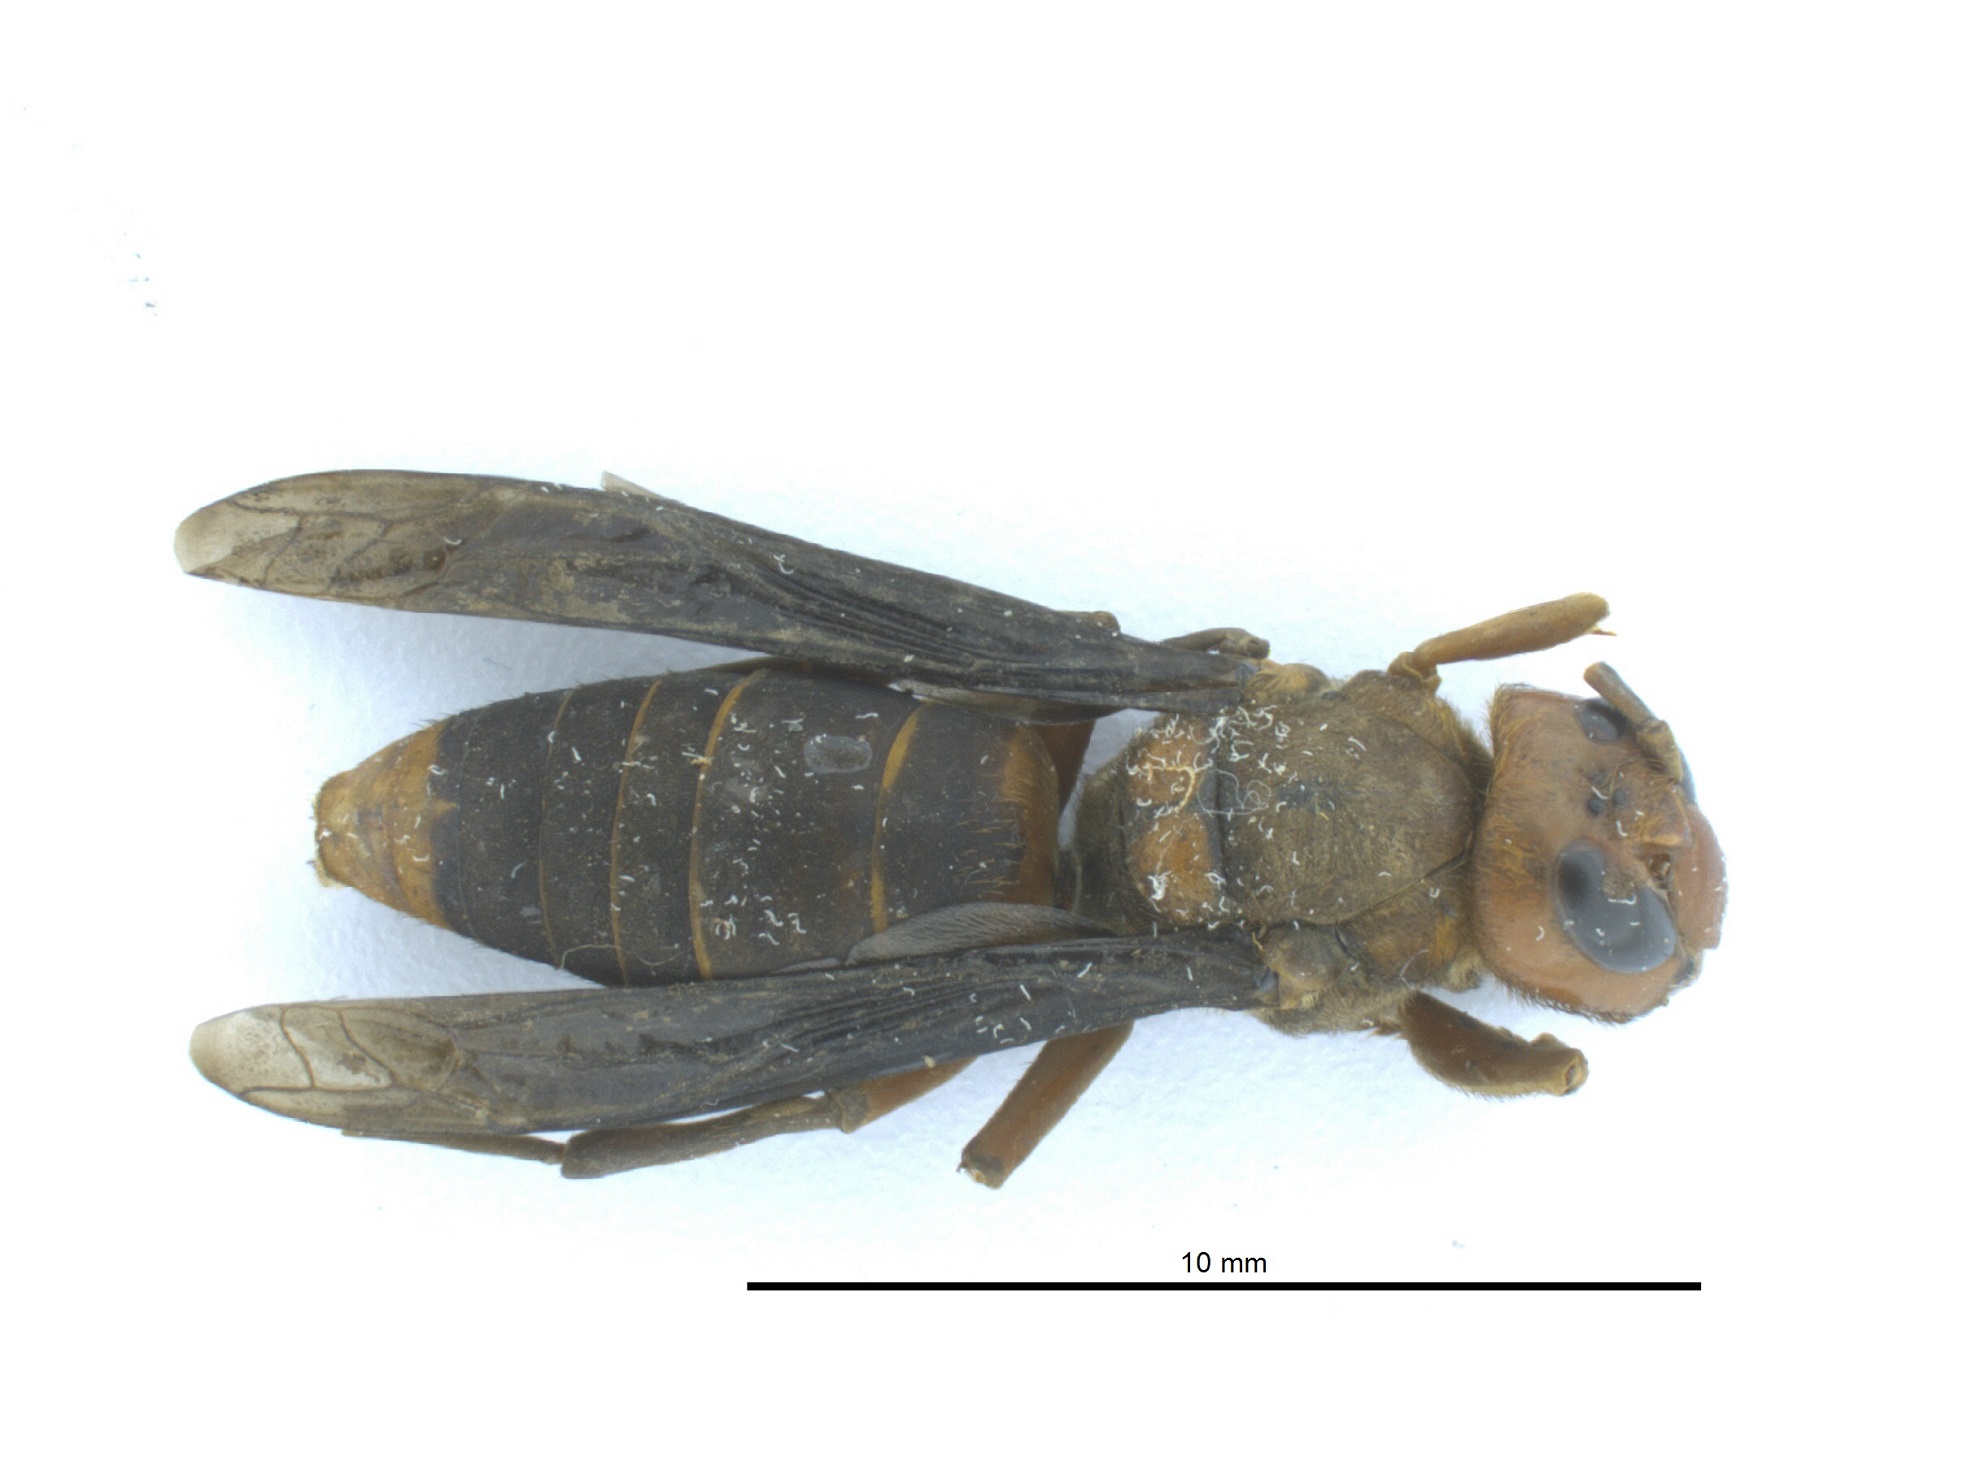 The Asian giant hornet that was found by Washington State investigators on June 8, 2021 (Washington State Department of Agriculture)